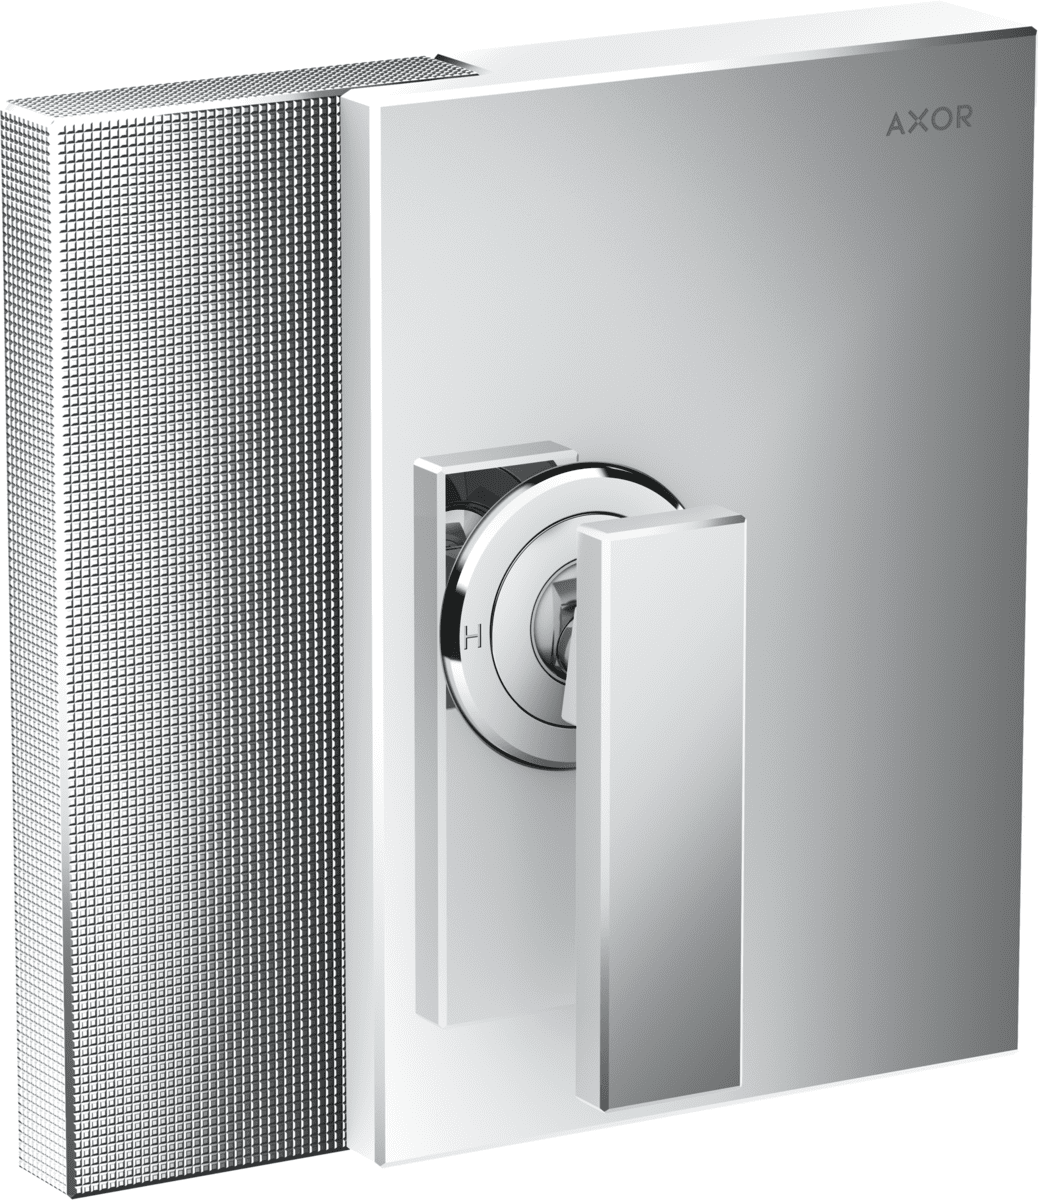 Picture of HANSGROHE AXOR Edge Single lever shower mixer for concealed installation - diamond cut #46651000 - Chrome